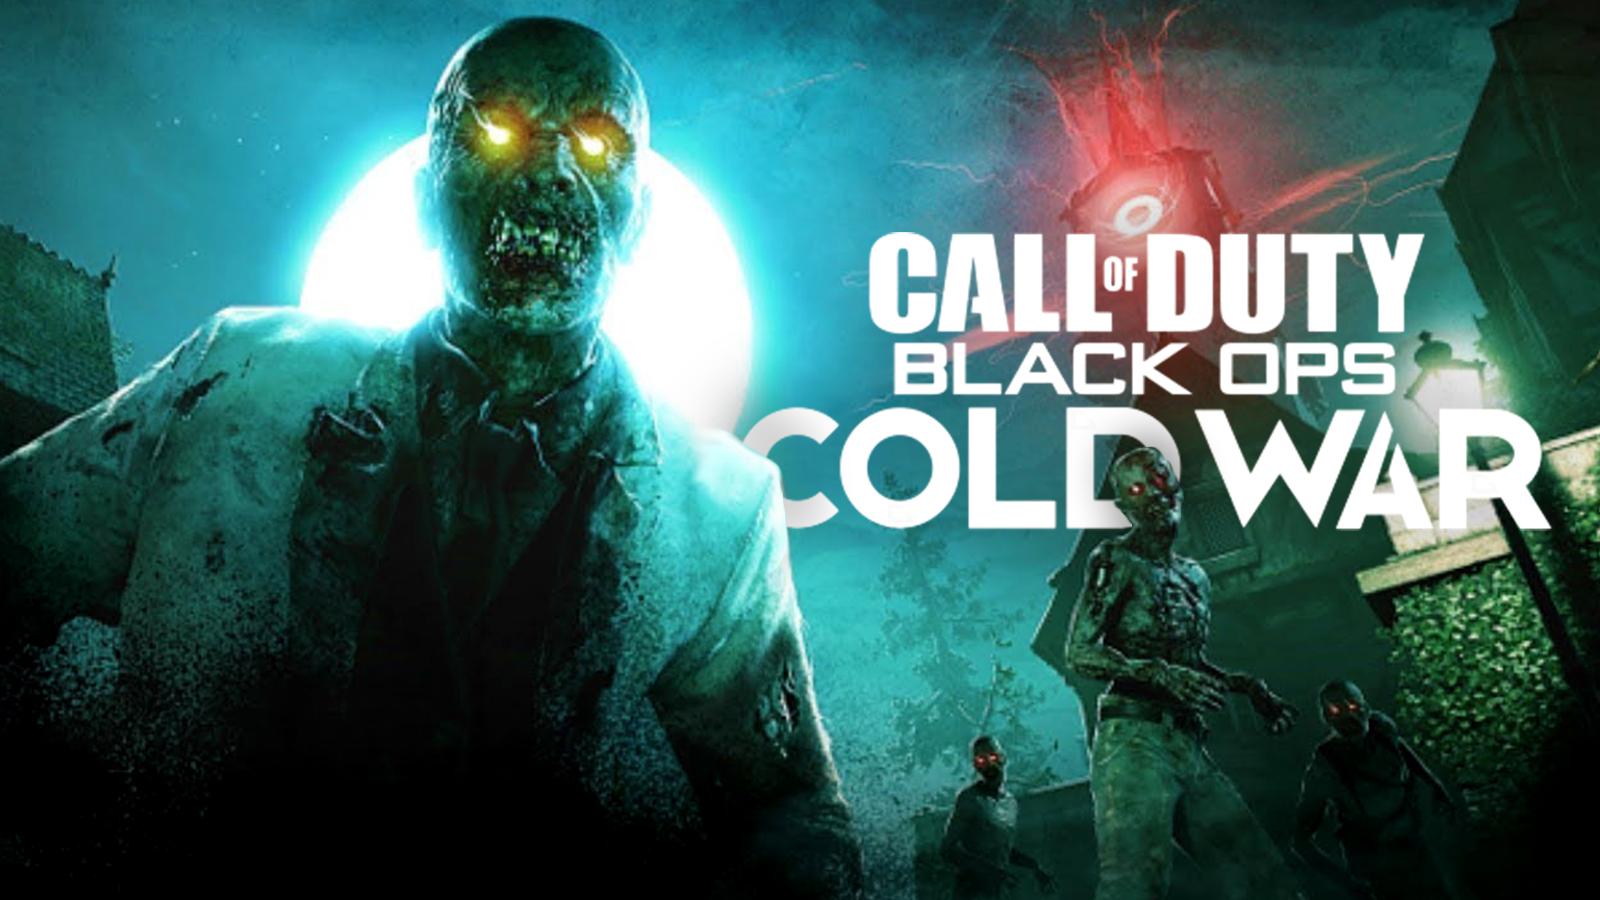 COD] Which of these games has the best split-screen local